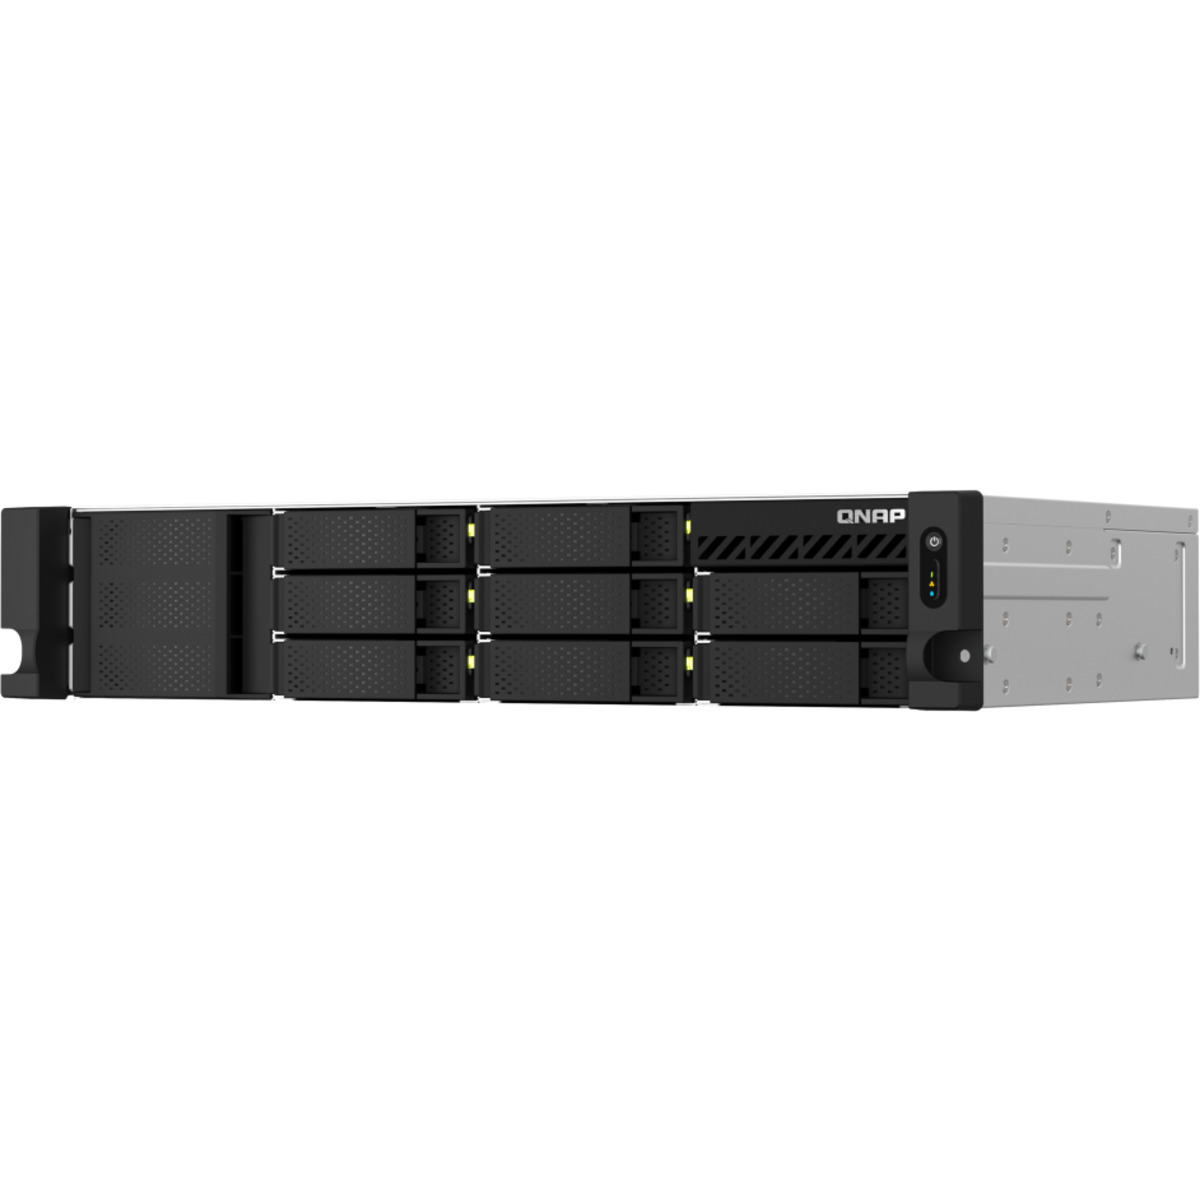 buy QNAP TS-864eU-RP 32tb RackMount NAS - Network Attached Storage Device 8x4000gb Samsung 870 EVO MZ-77E4T0BAM 2.5 560/530MB/s SATA 6Gb/s SSD CONSUMER Class Drives Installed - Burn-In Tested - nas headquarters buy network attached storage server device das new raid-5 free shipping usa spring sale TS-864eU-RP